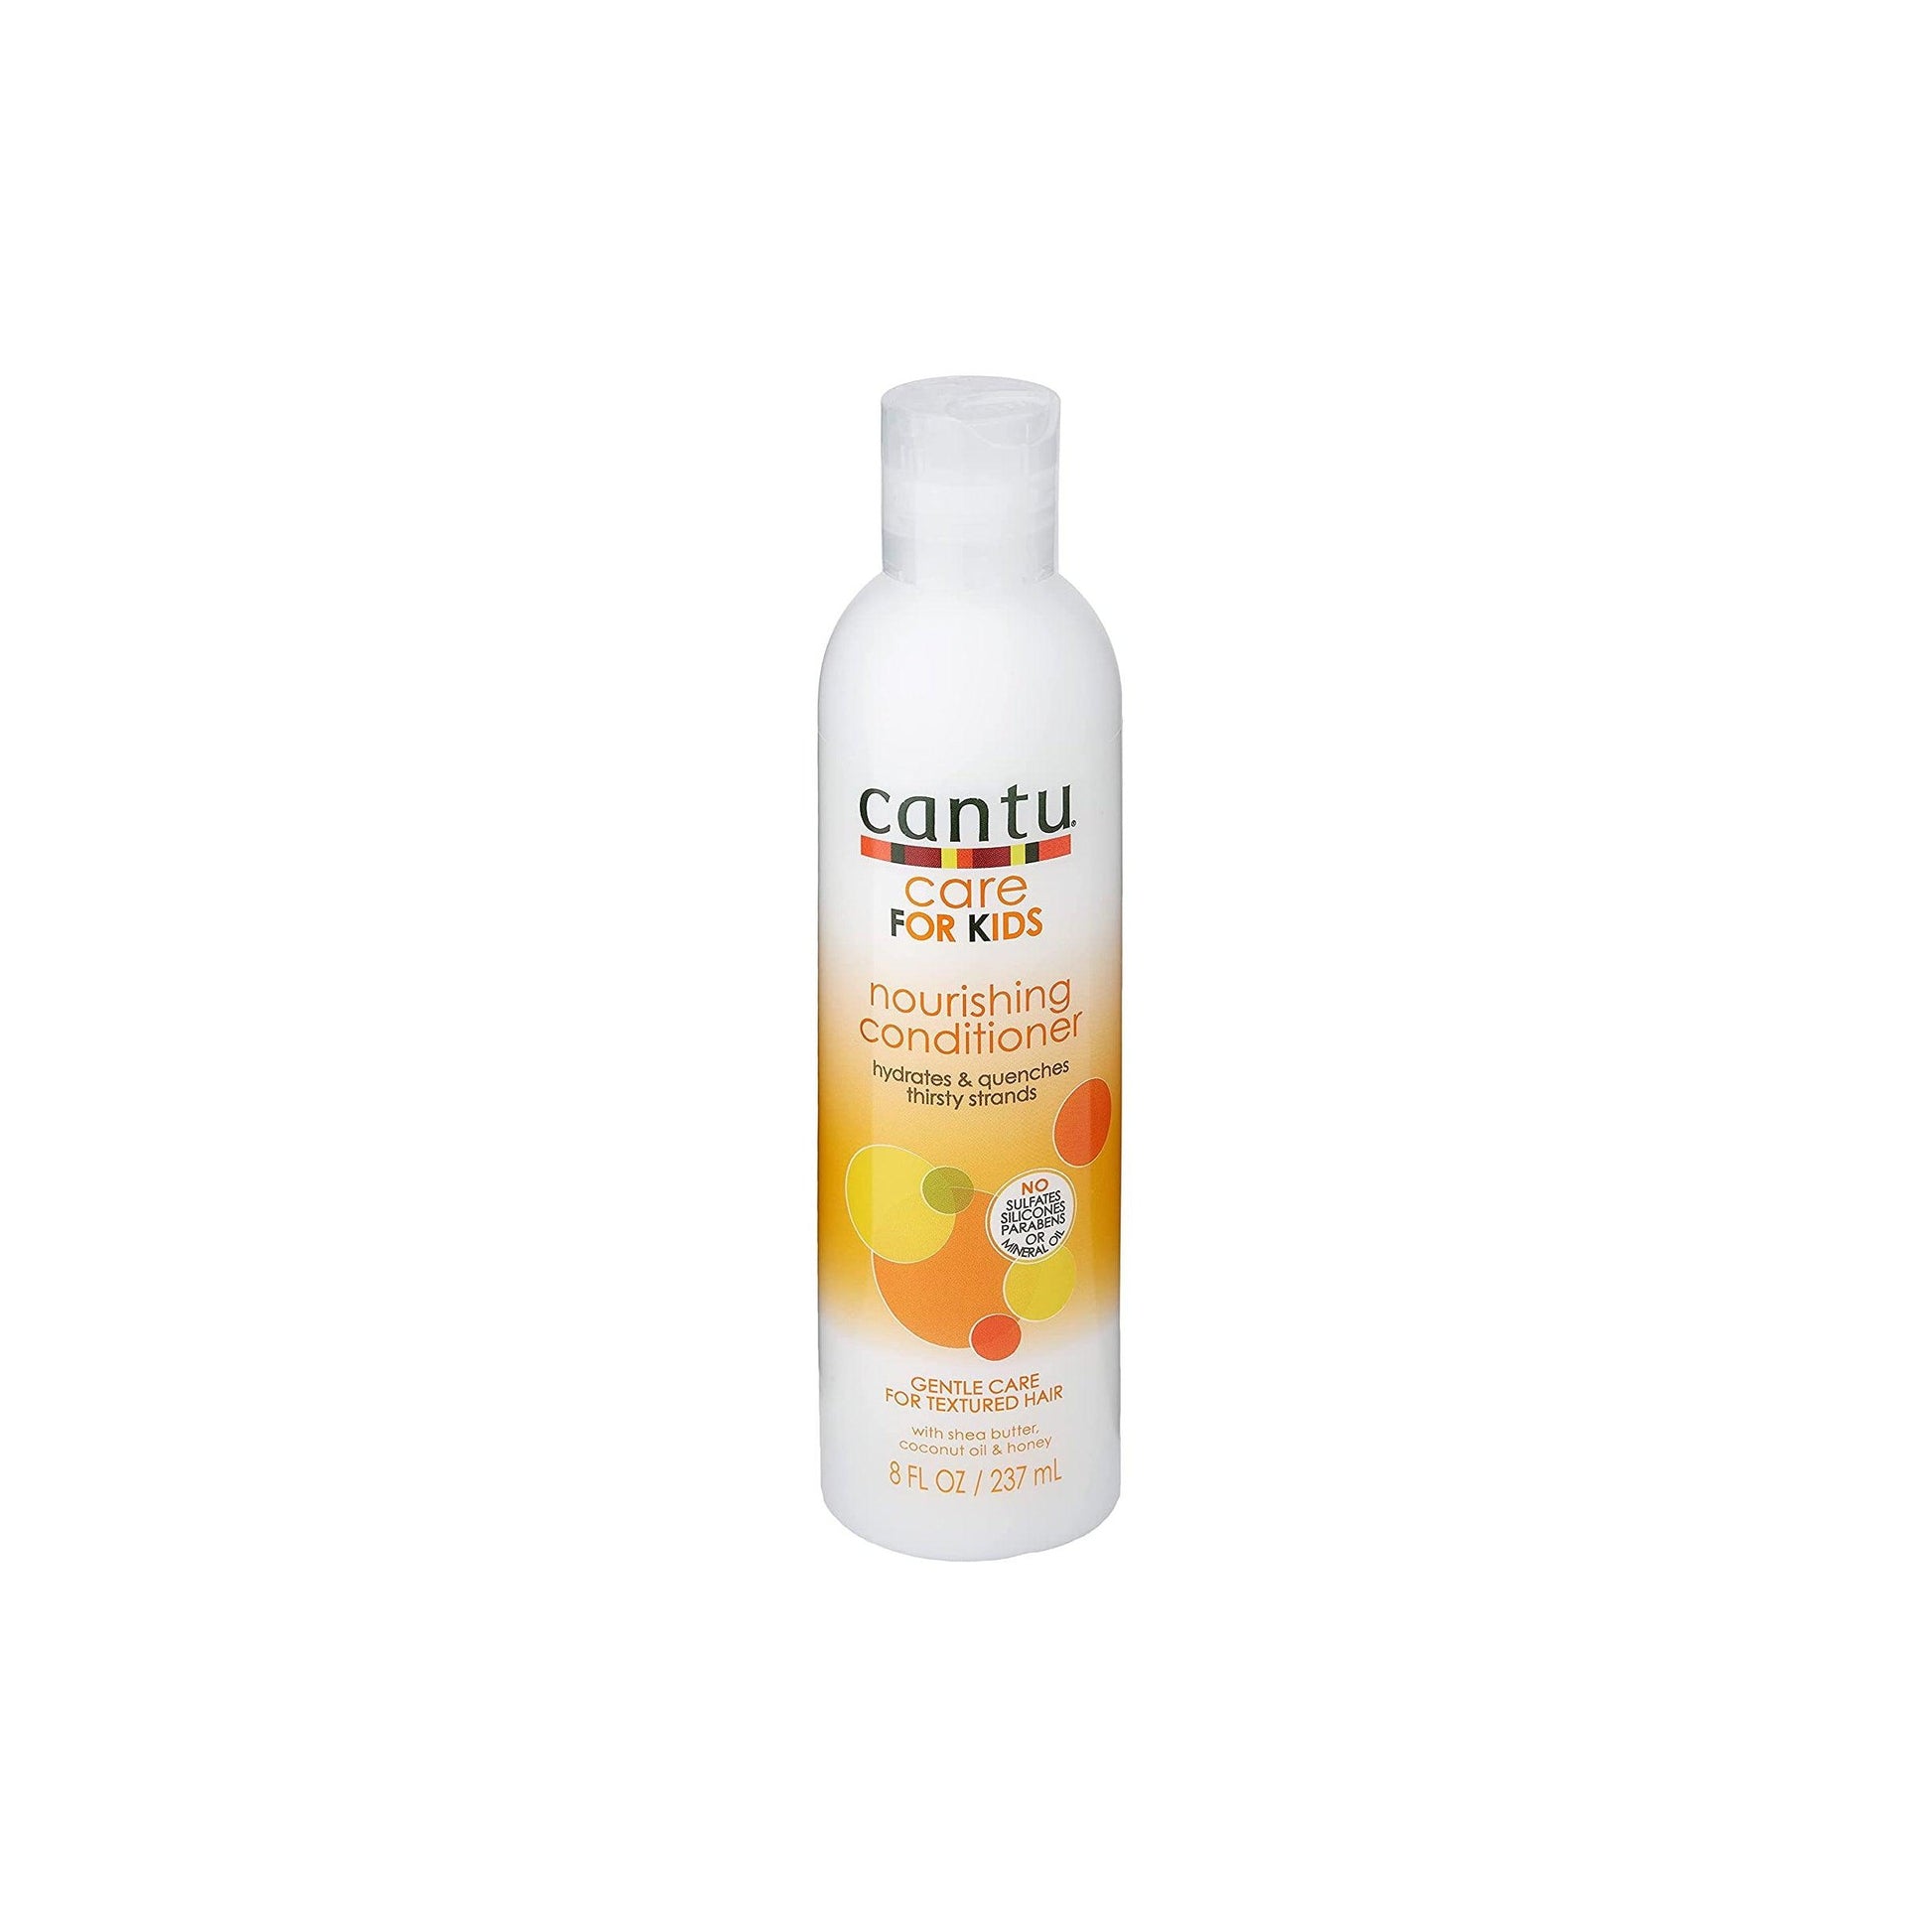 Cantu Care for Kids Nourishing Conditioner - Beauty Bounty